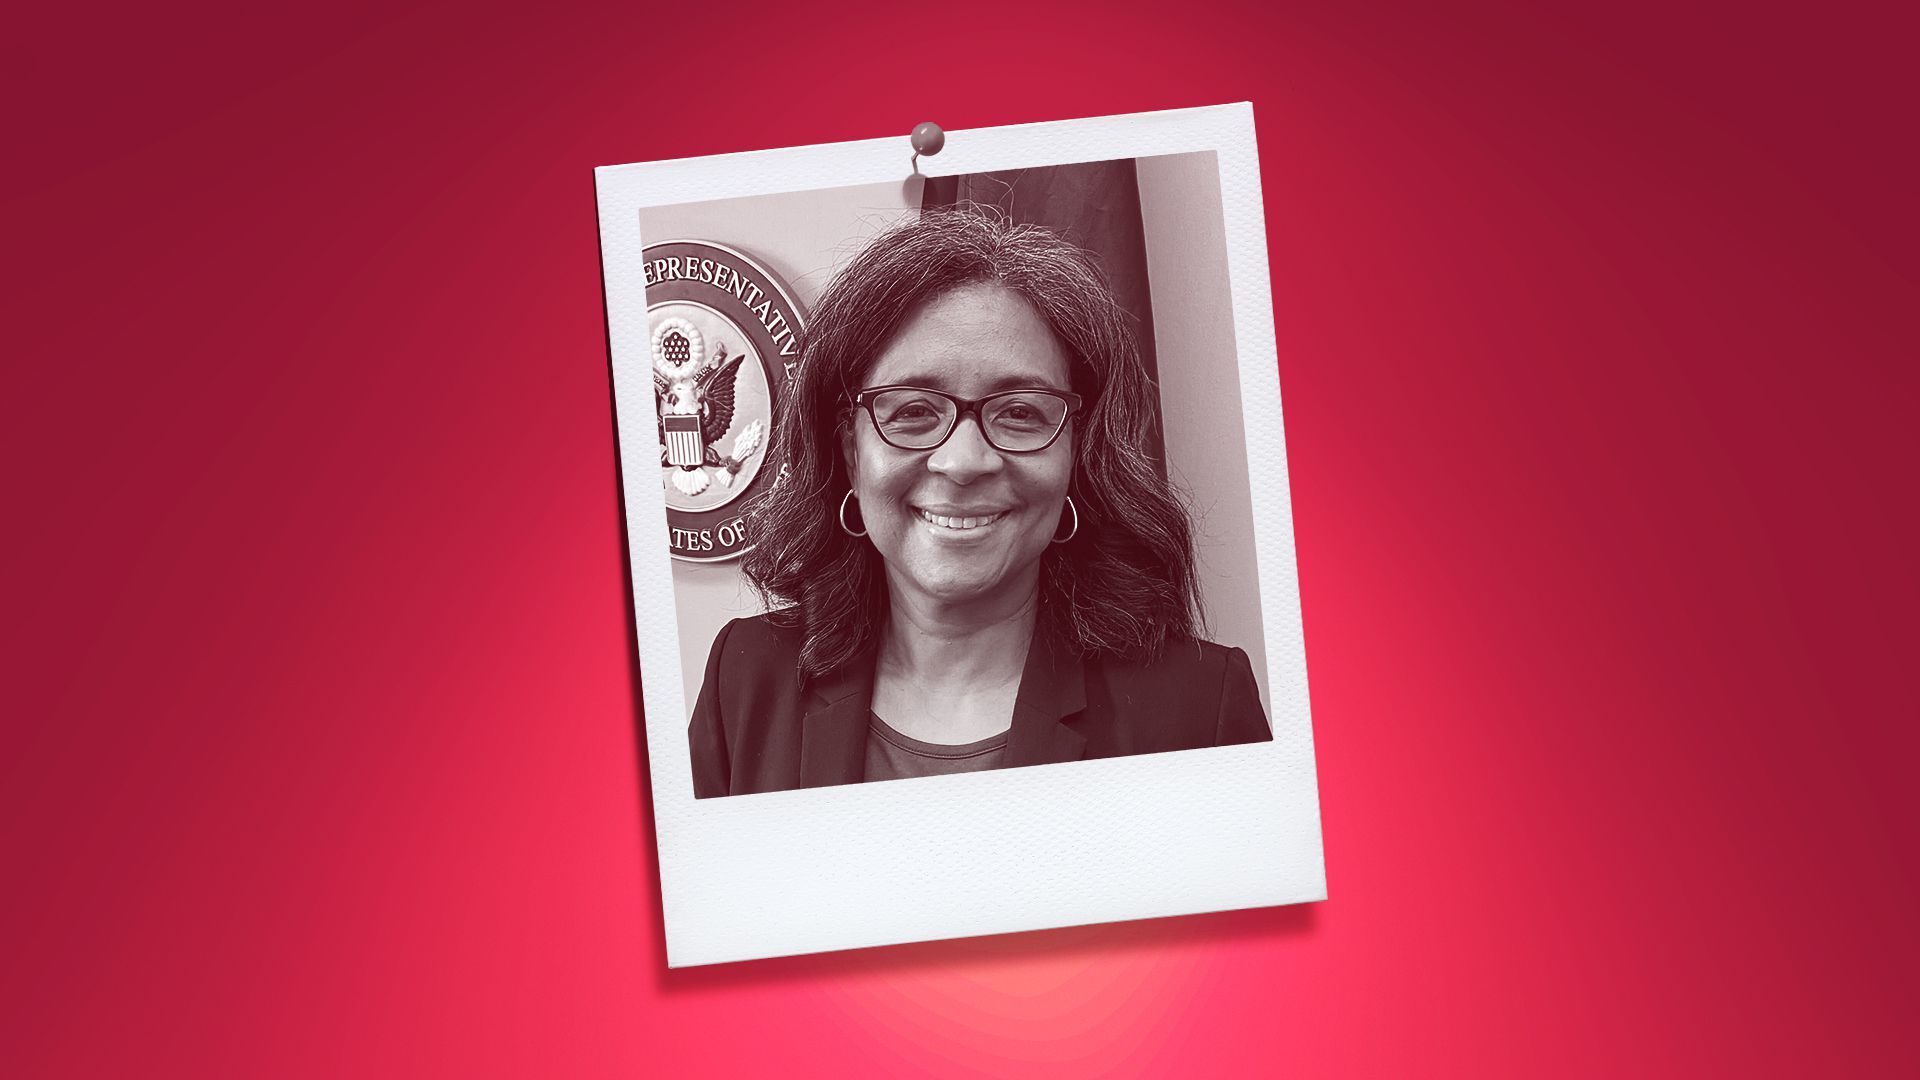 Photo illustration of U.S. Rep. Marilyn Strickland, in an instant photo pinned to a red wall.